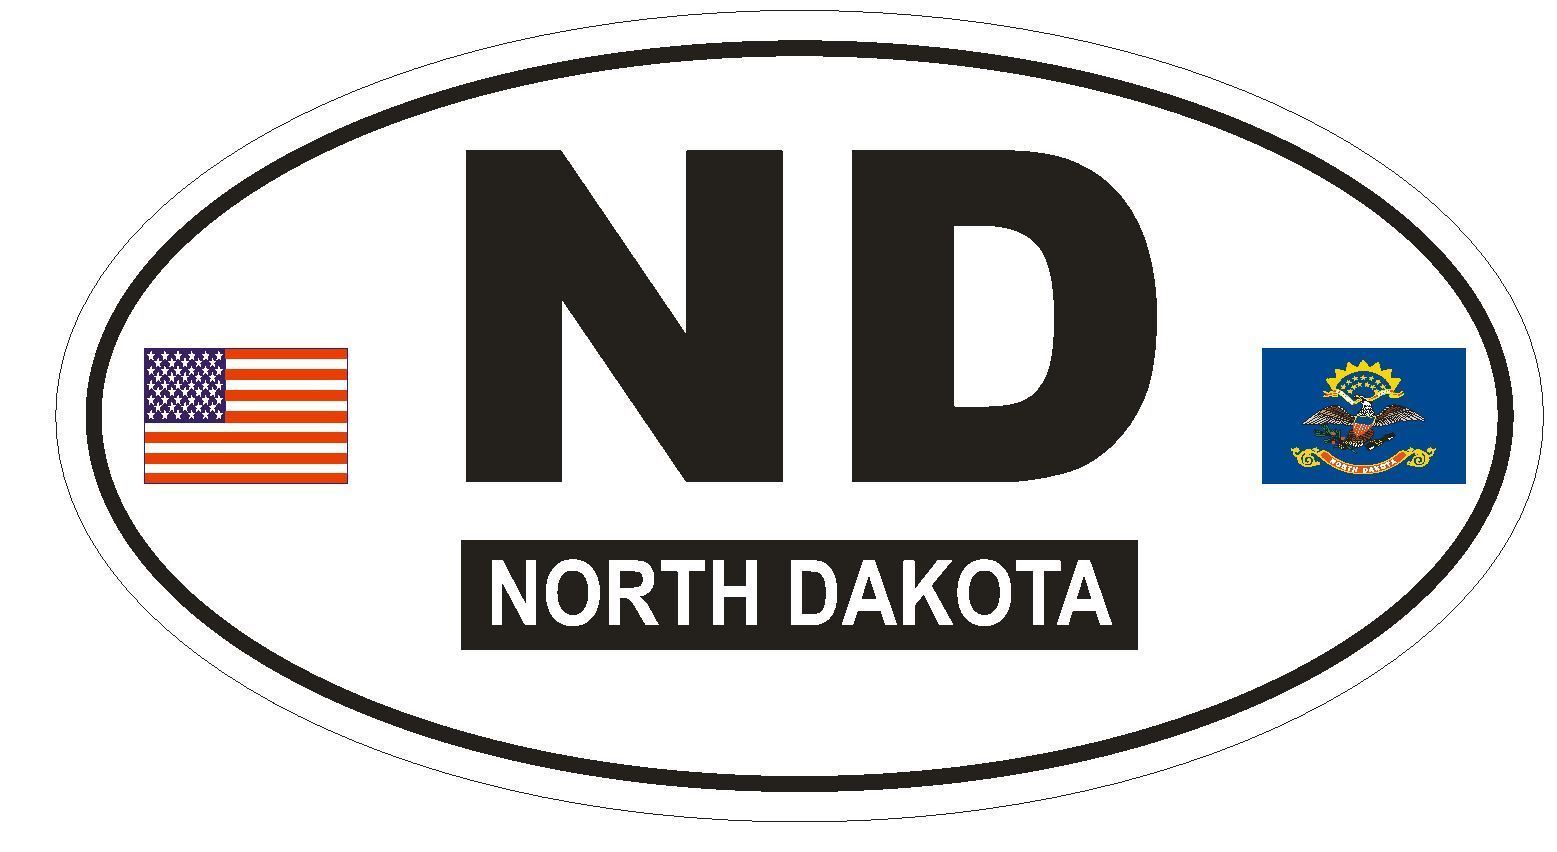 Primary image for ND North Dakota Oval Bumper Sticker or Helmet Sticker D780 Euro Oval with Flags